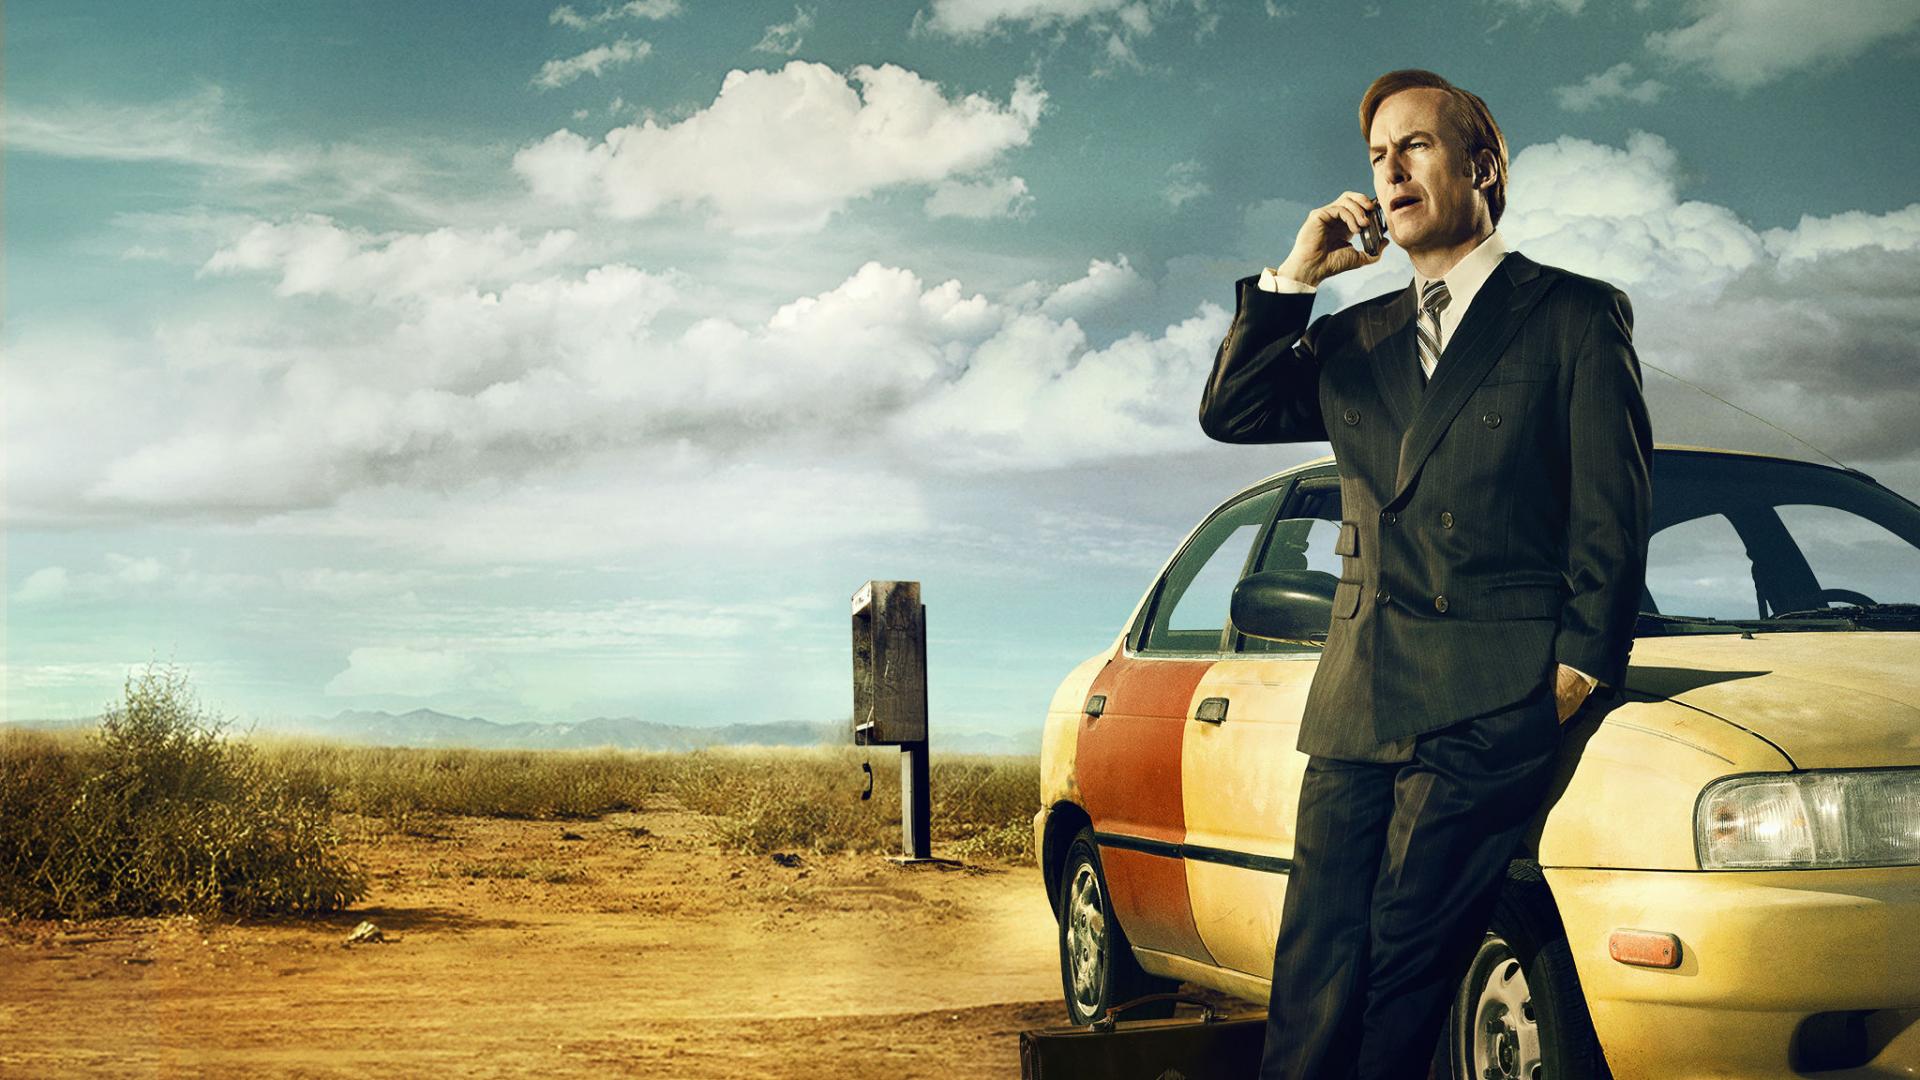 Better Call Saul Revealed The First Teaser And Release Date Of The